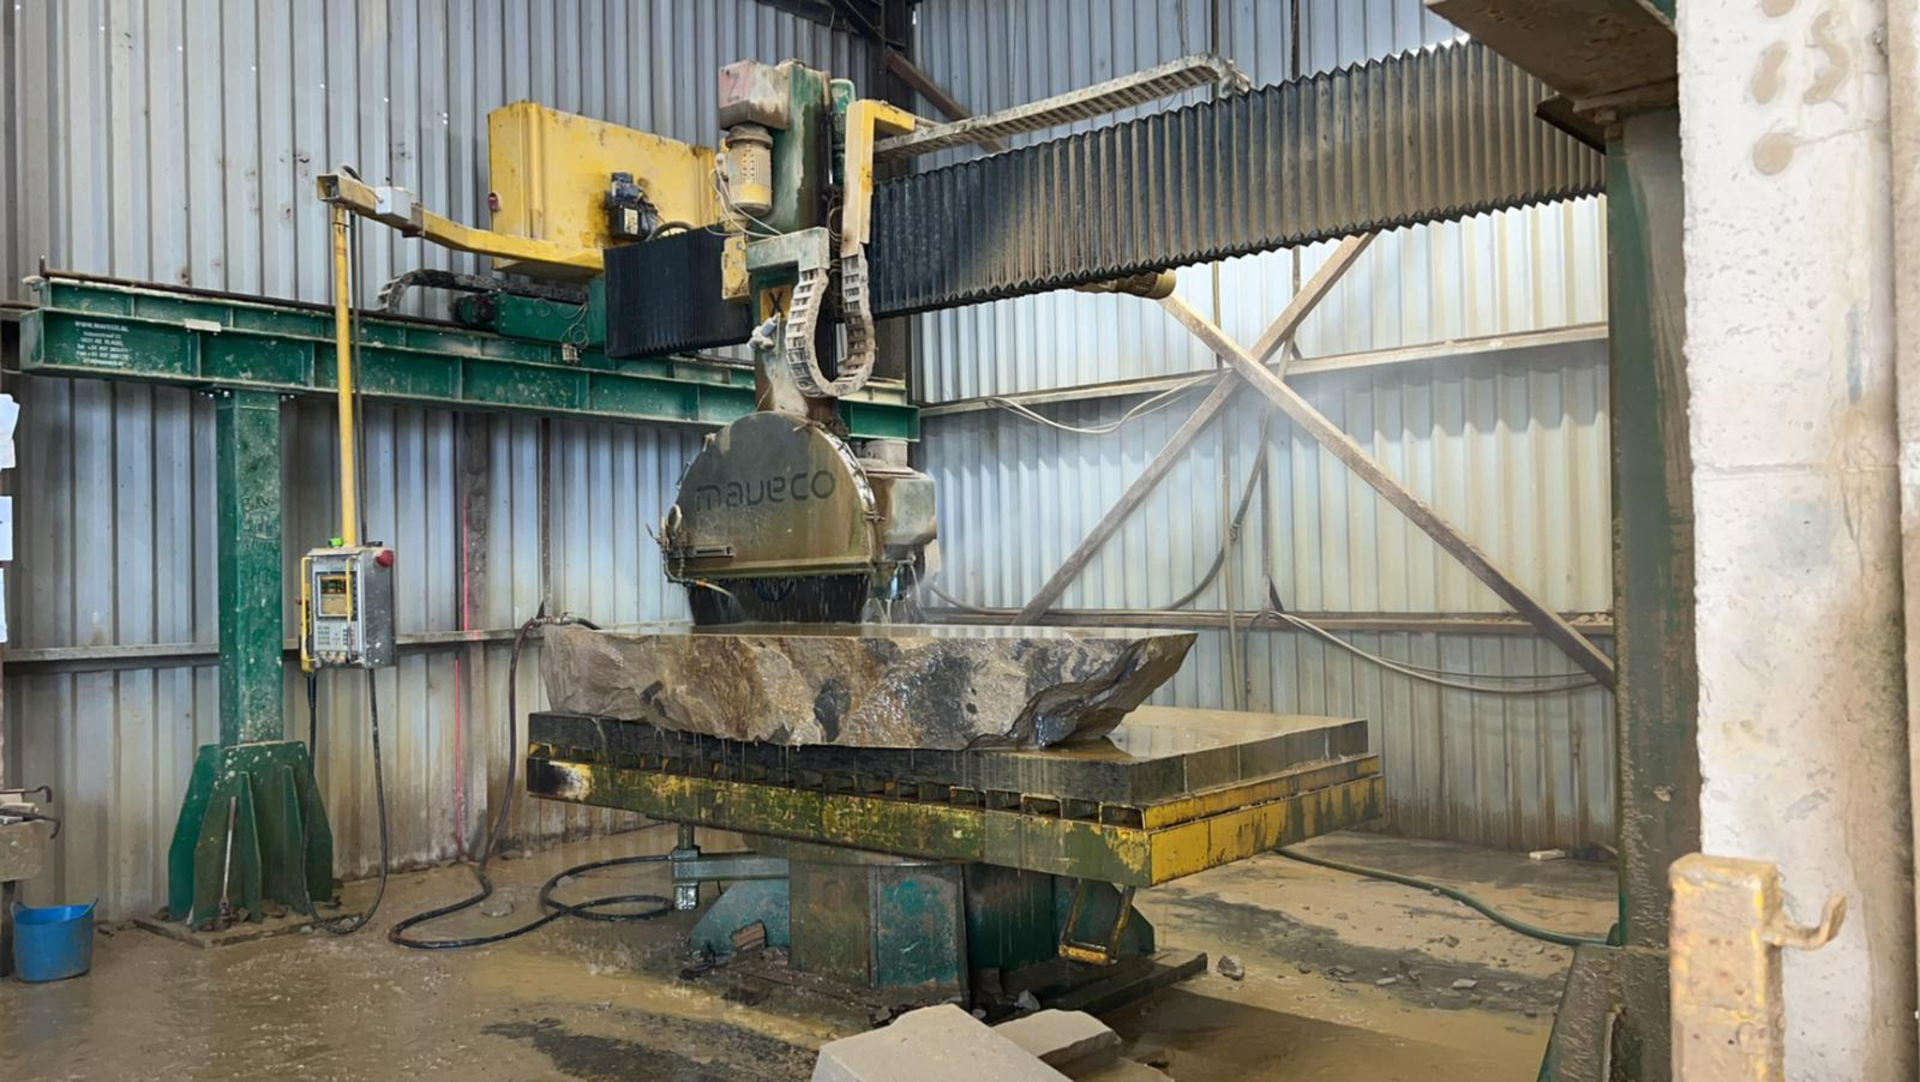 Maveco 1200 automatic Stone Saw Still in use every day Good condition  cuts like new well serviced